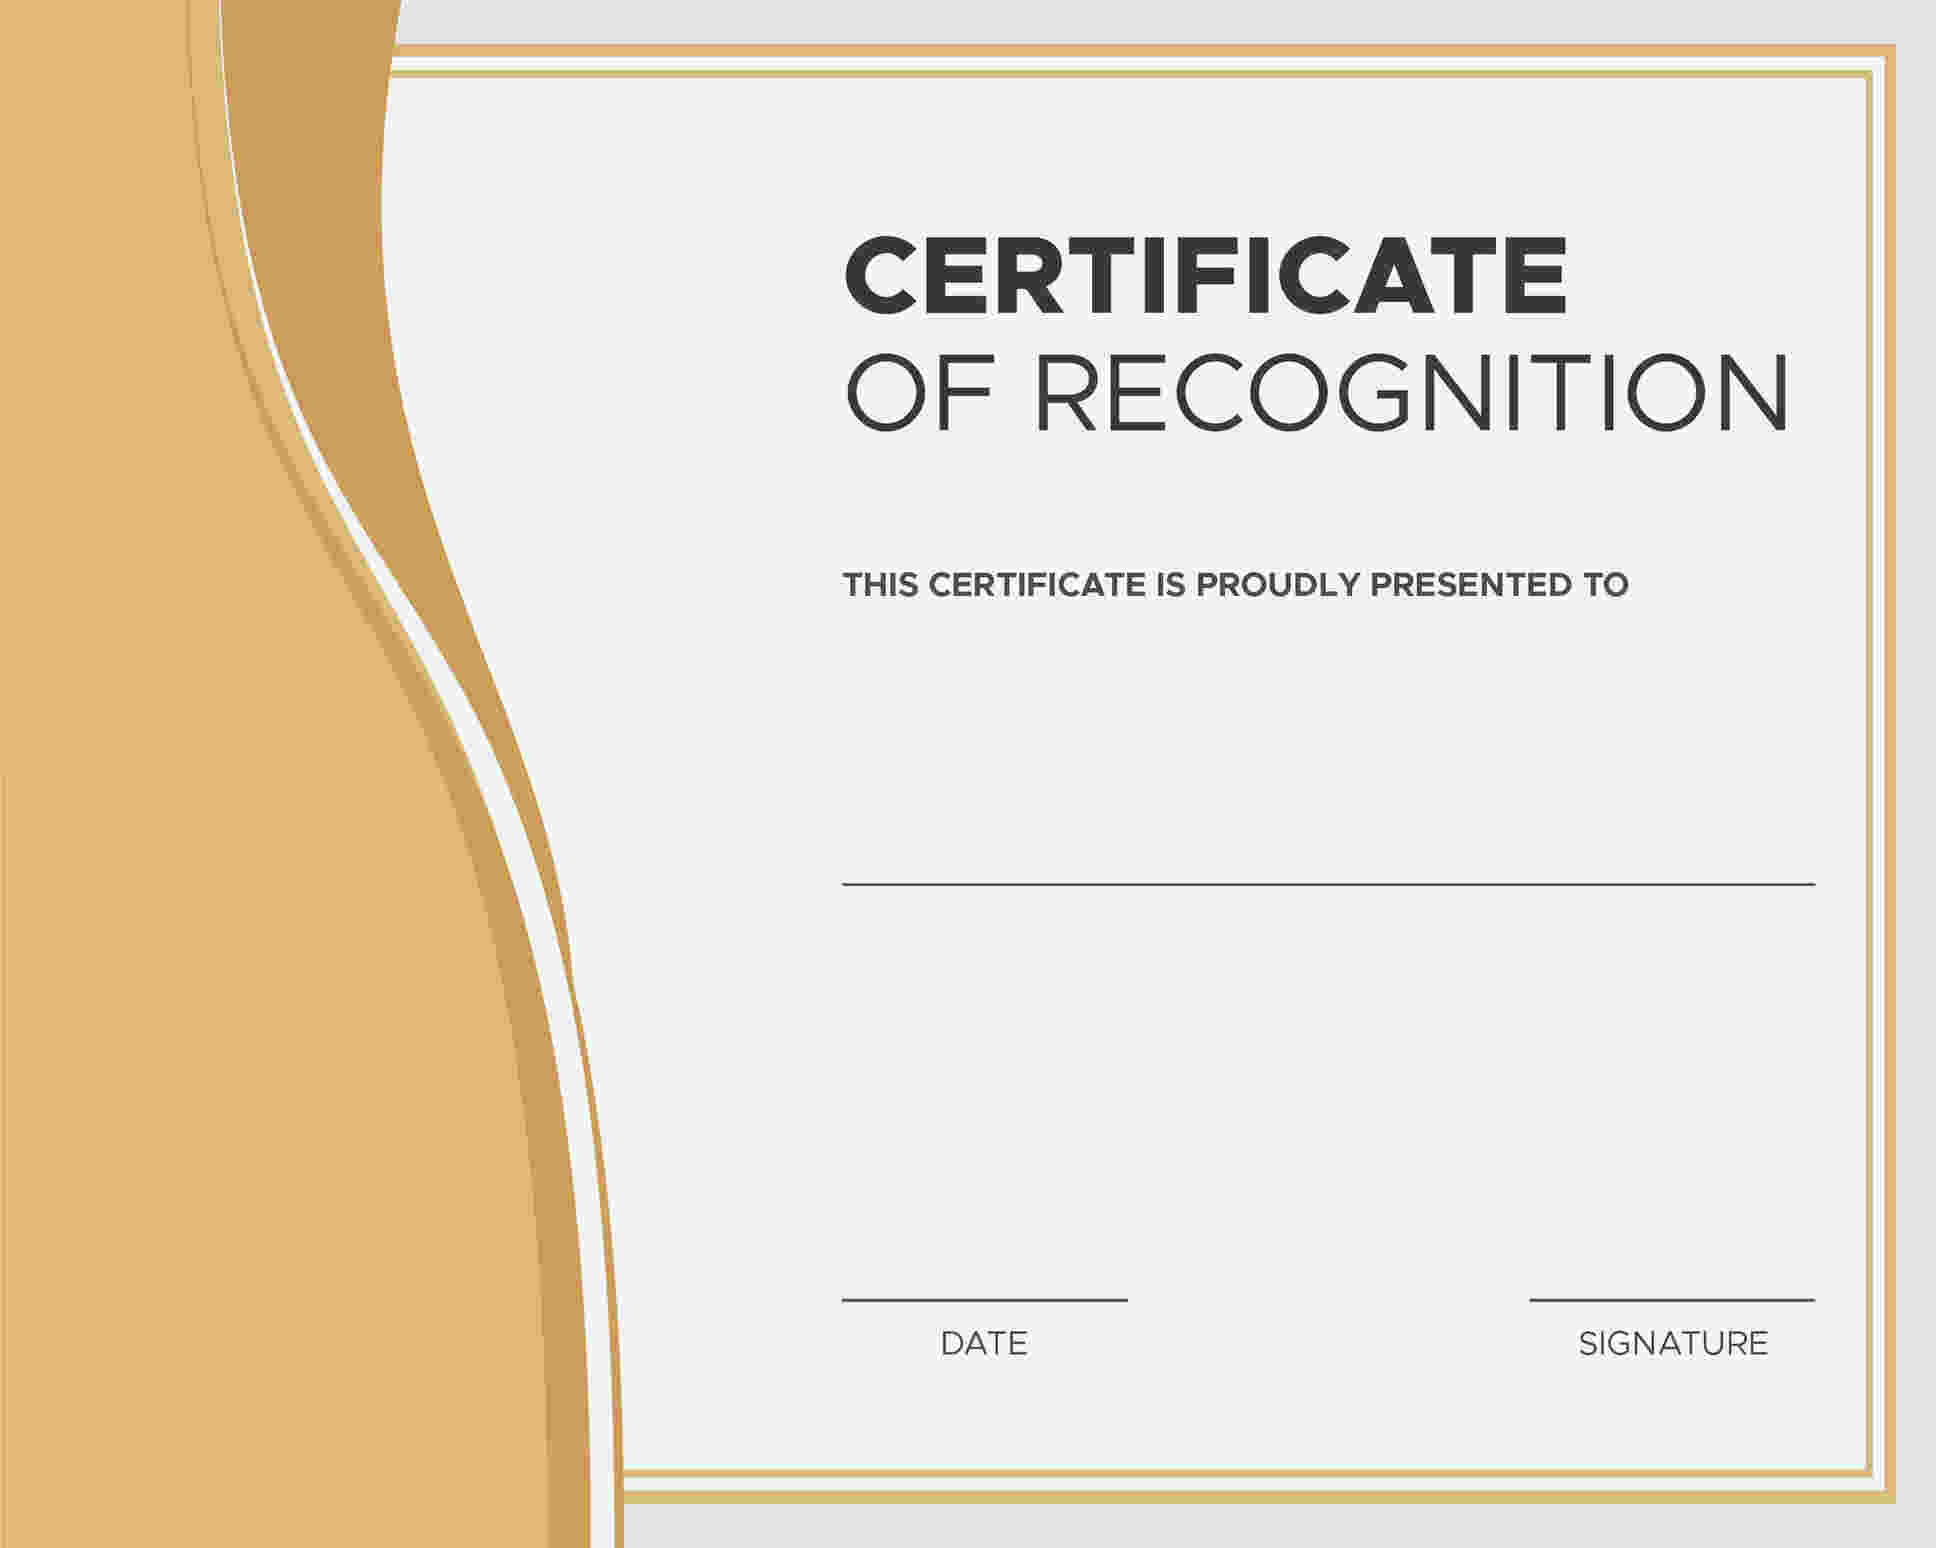 10 Amazing Award Certificate Templates in 10 - Recognize With Employee Of The Year Certificate Template Free